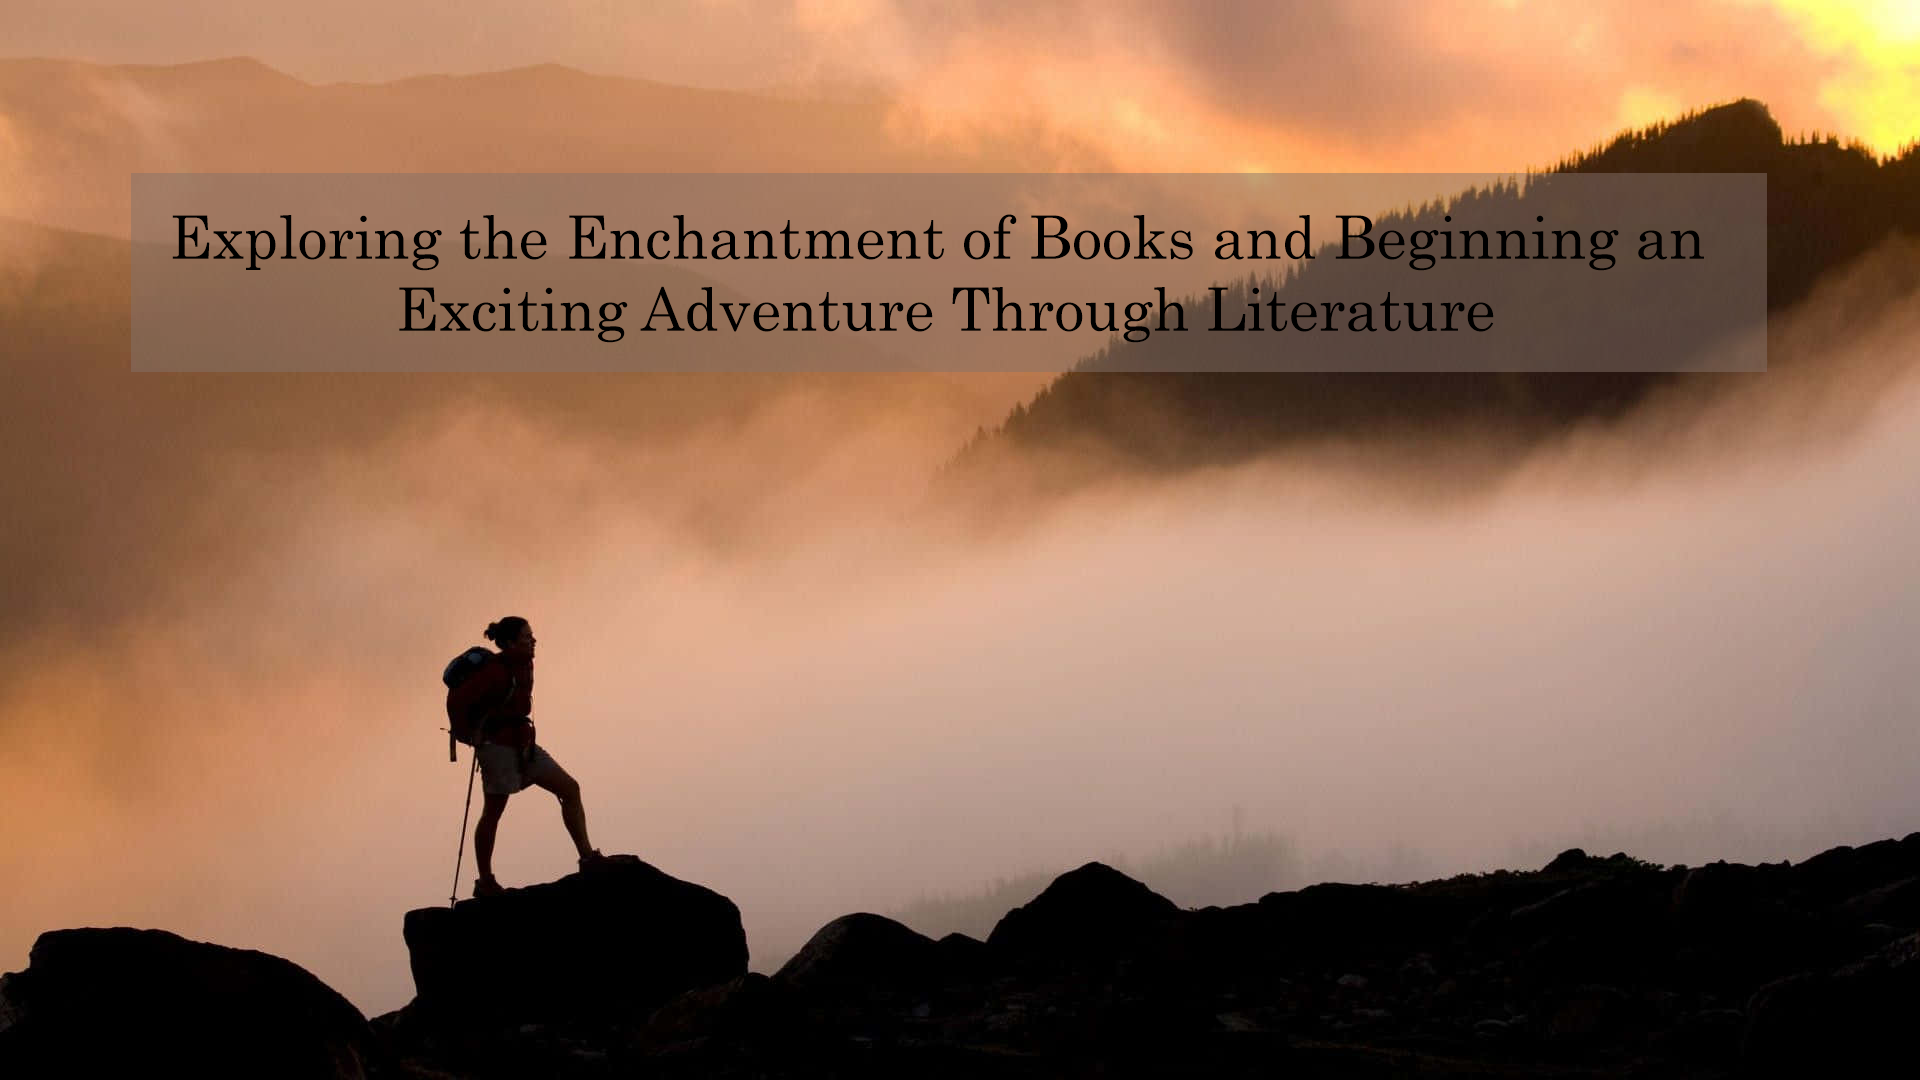 Exploring the Enchantment of Books and Beginning an Exciting Adventure Through Literature